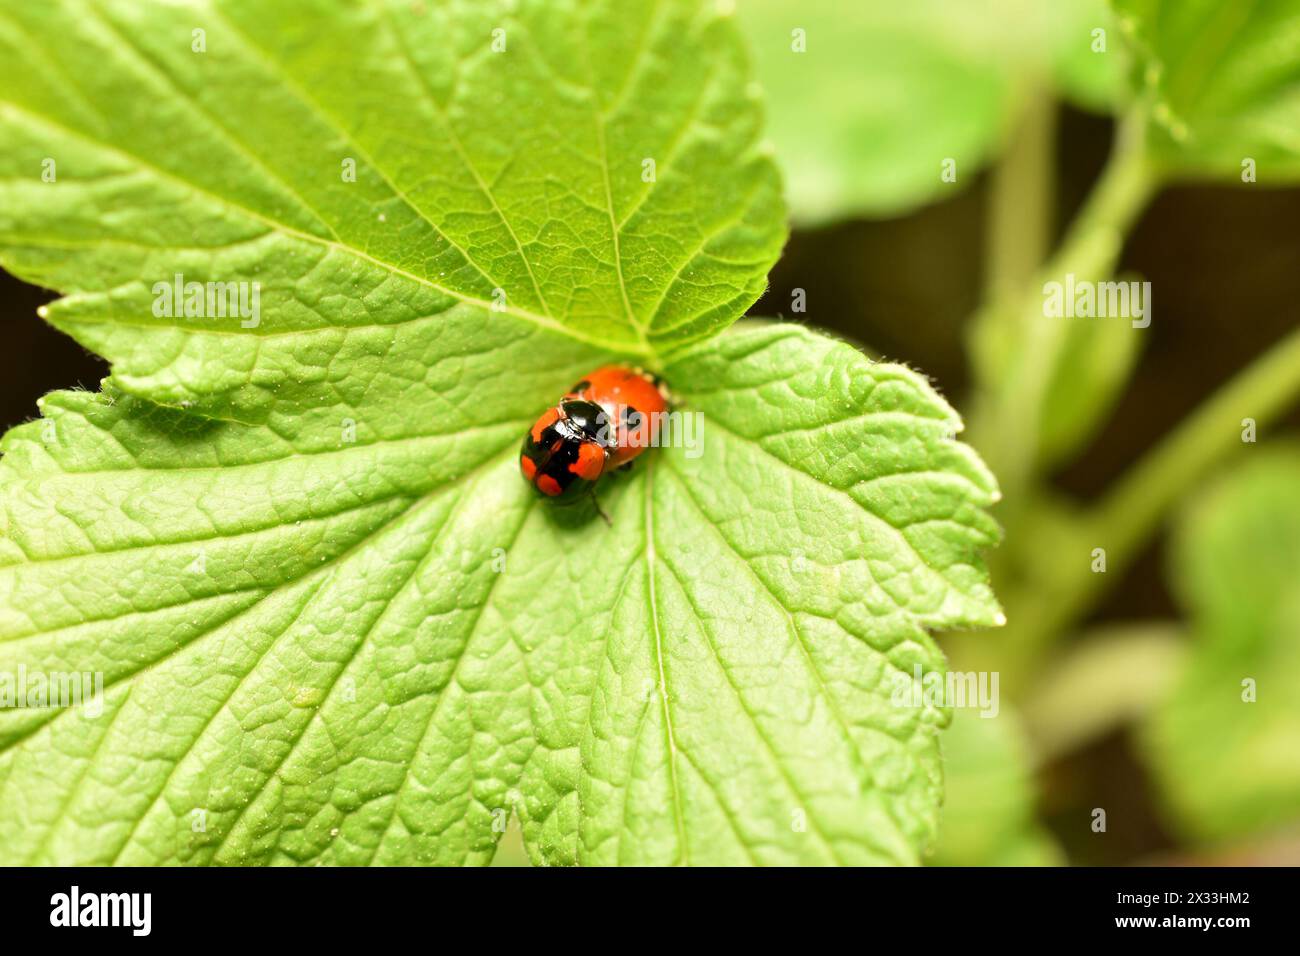 Two red ladybugs breed on a wide green leaf. Stock Photo